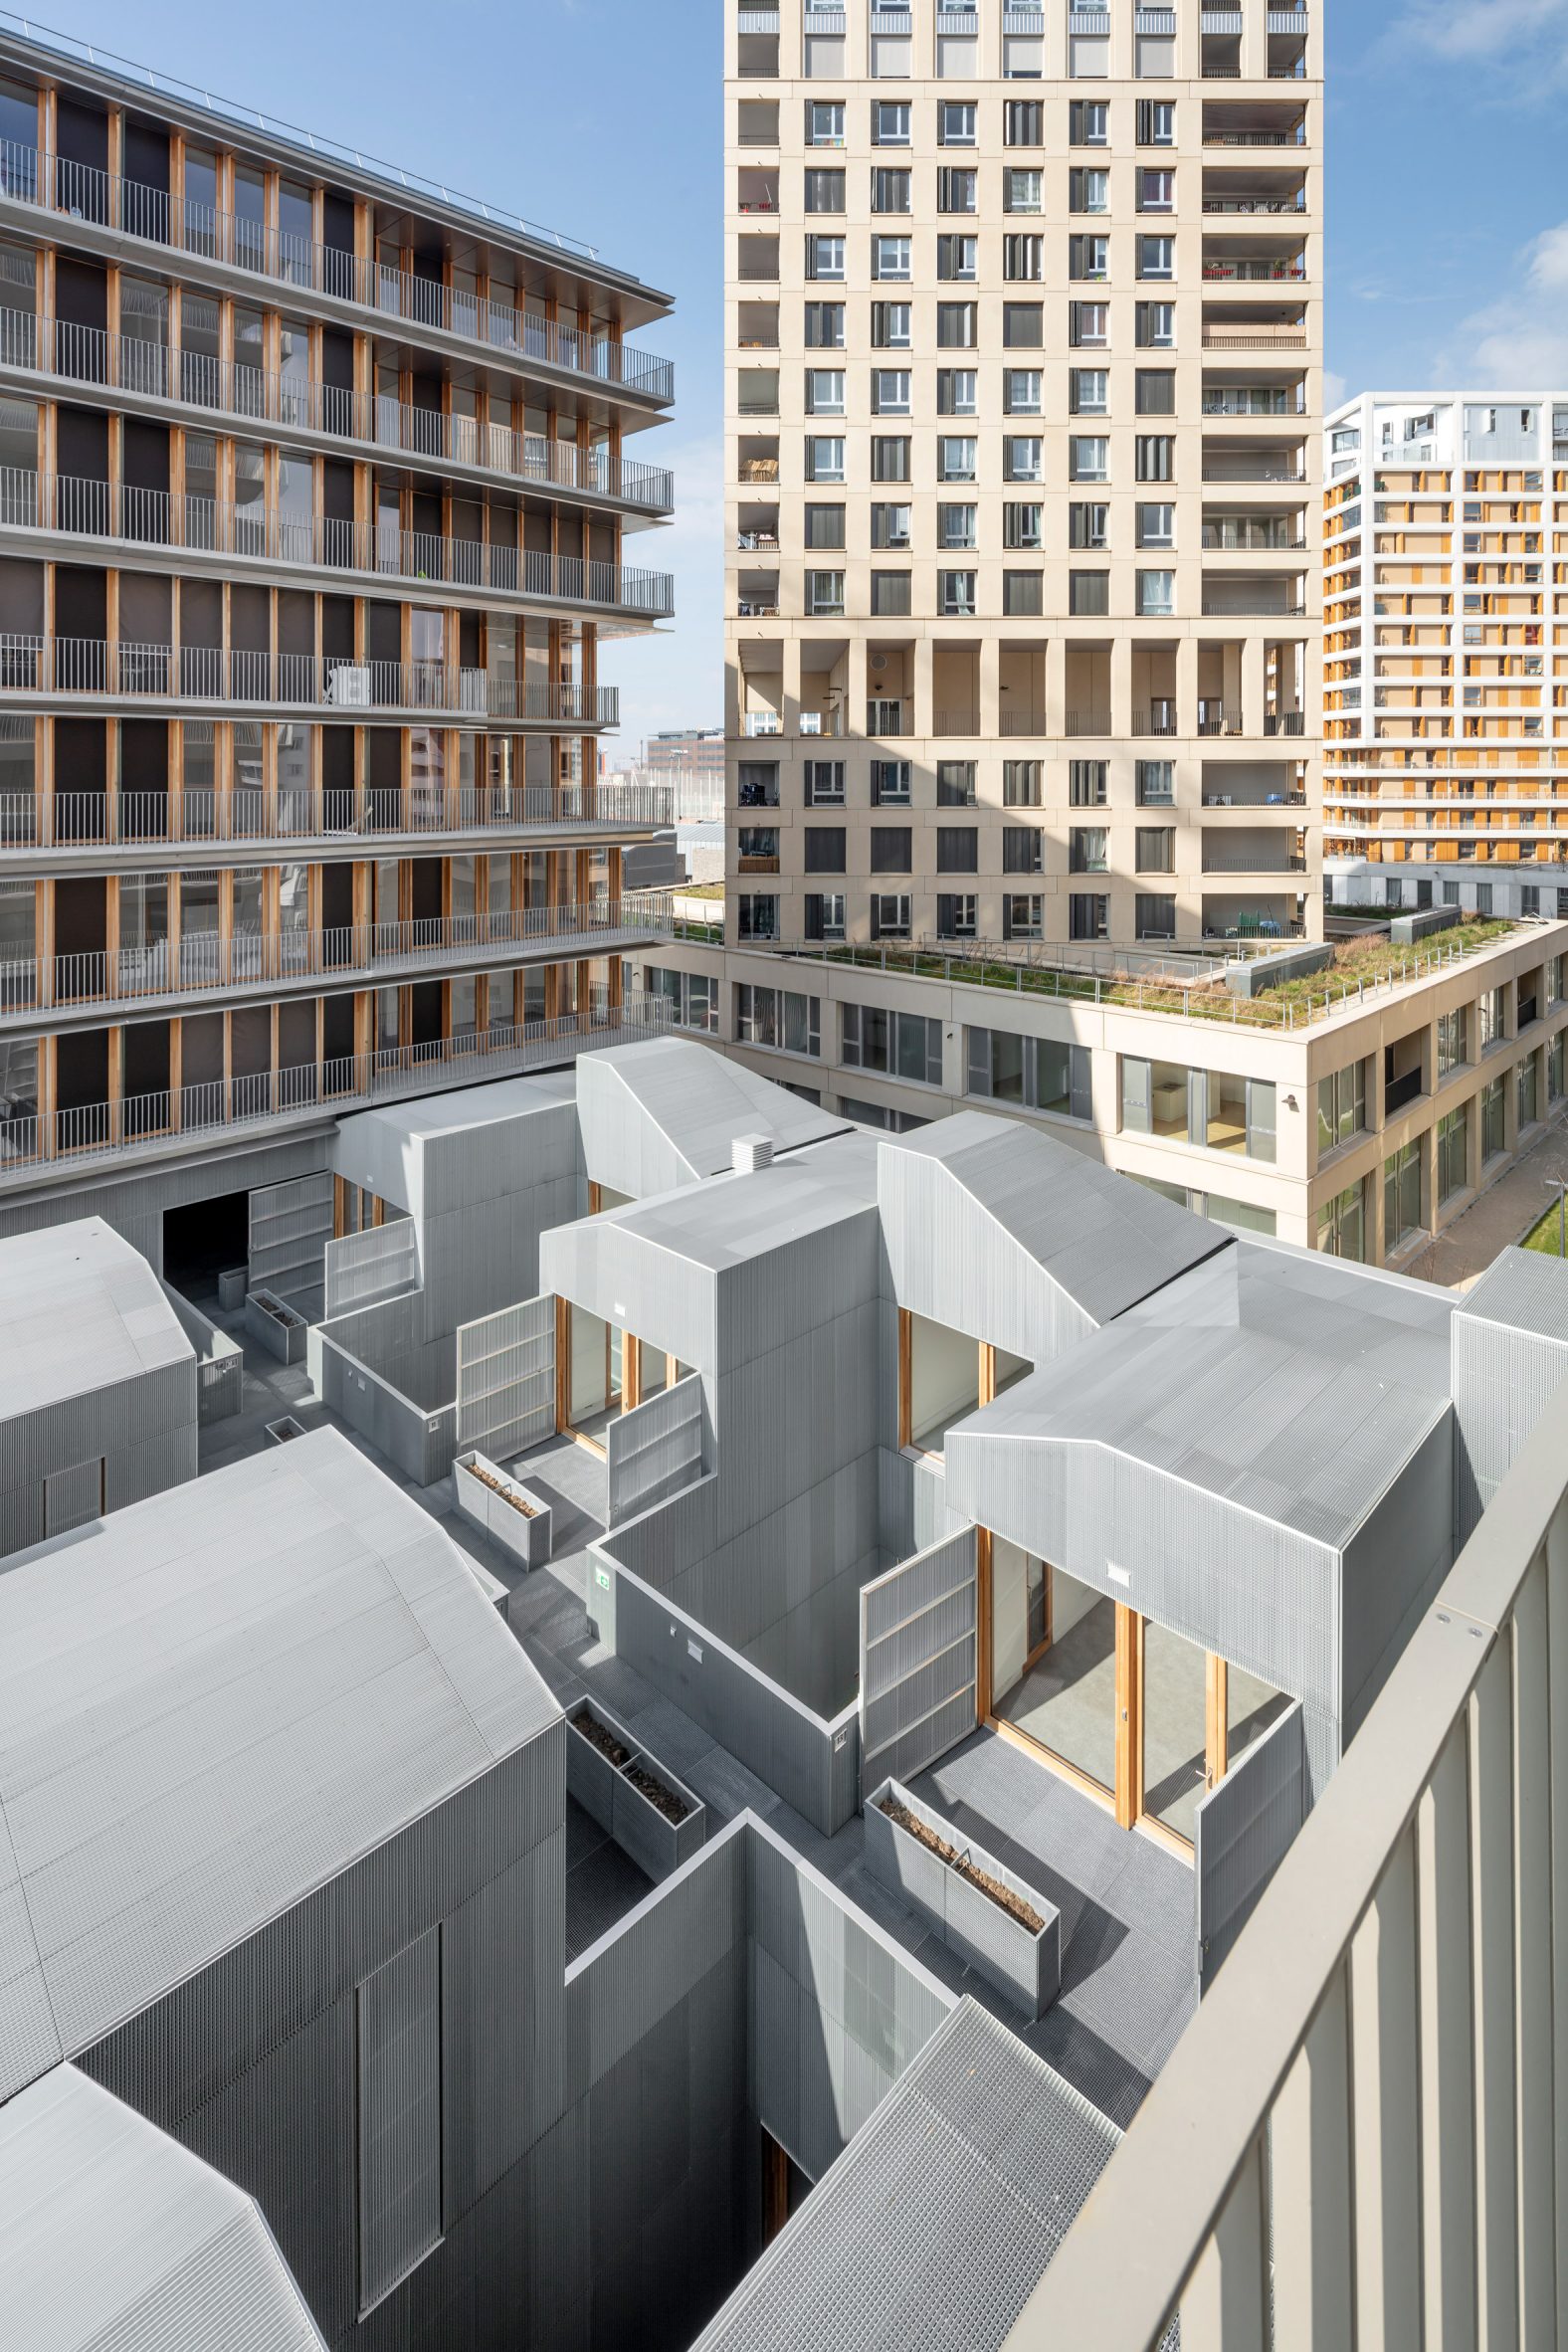 An aerial view of a mixed-use development in Paris